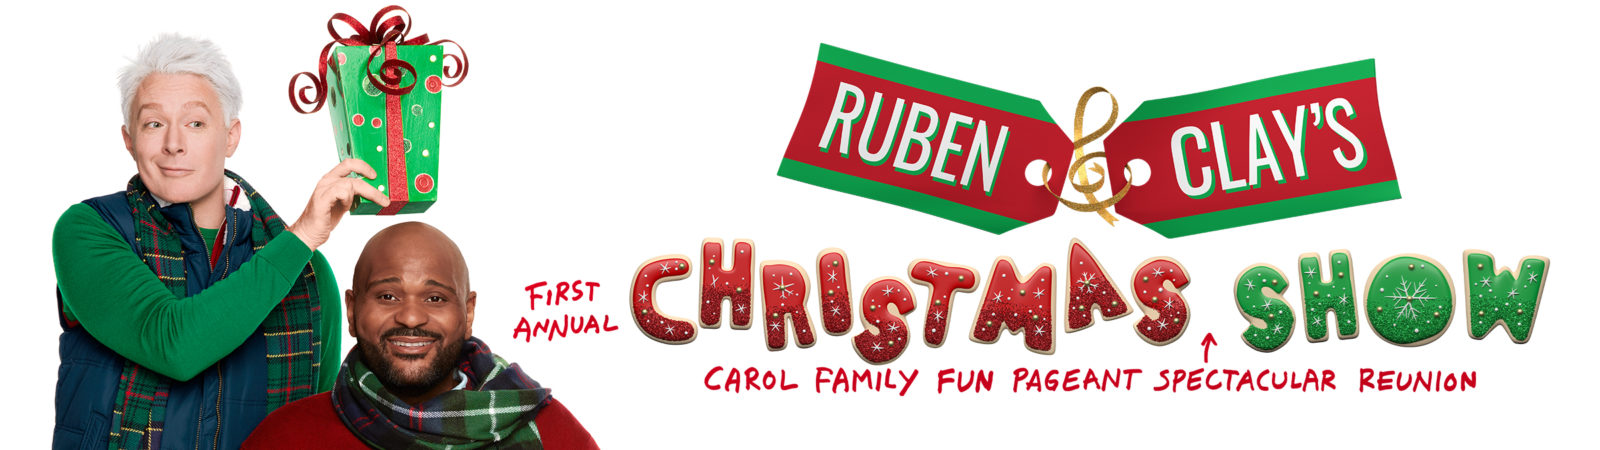 Ruben and Clay’s Christmas Show